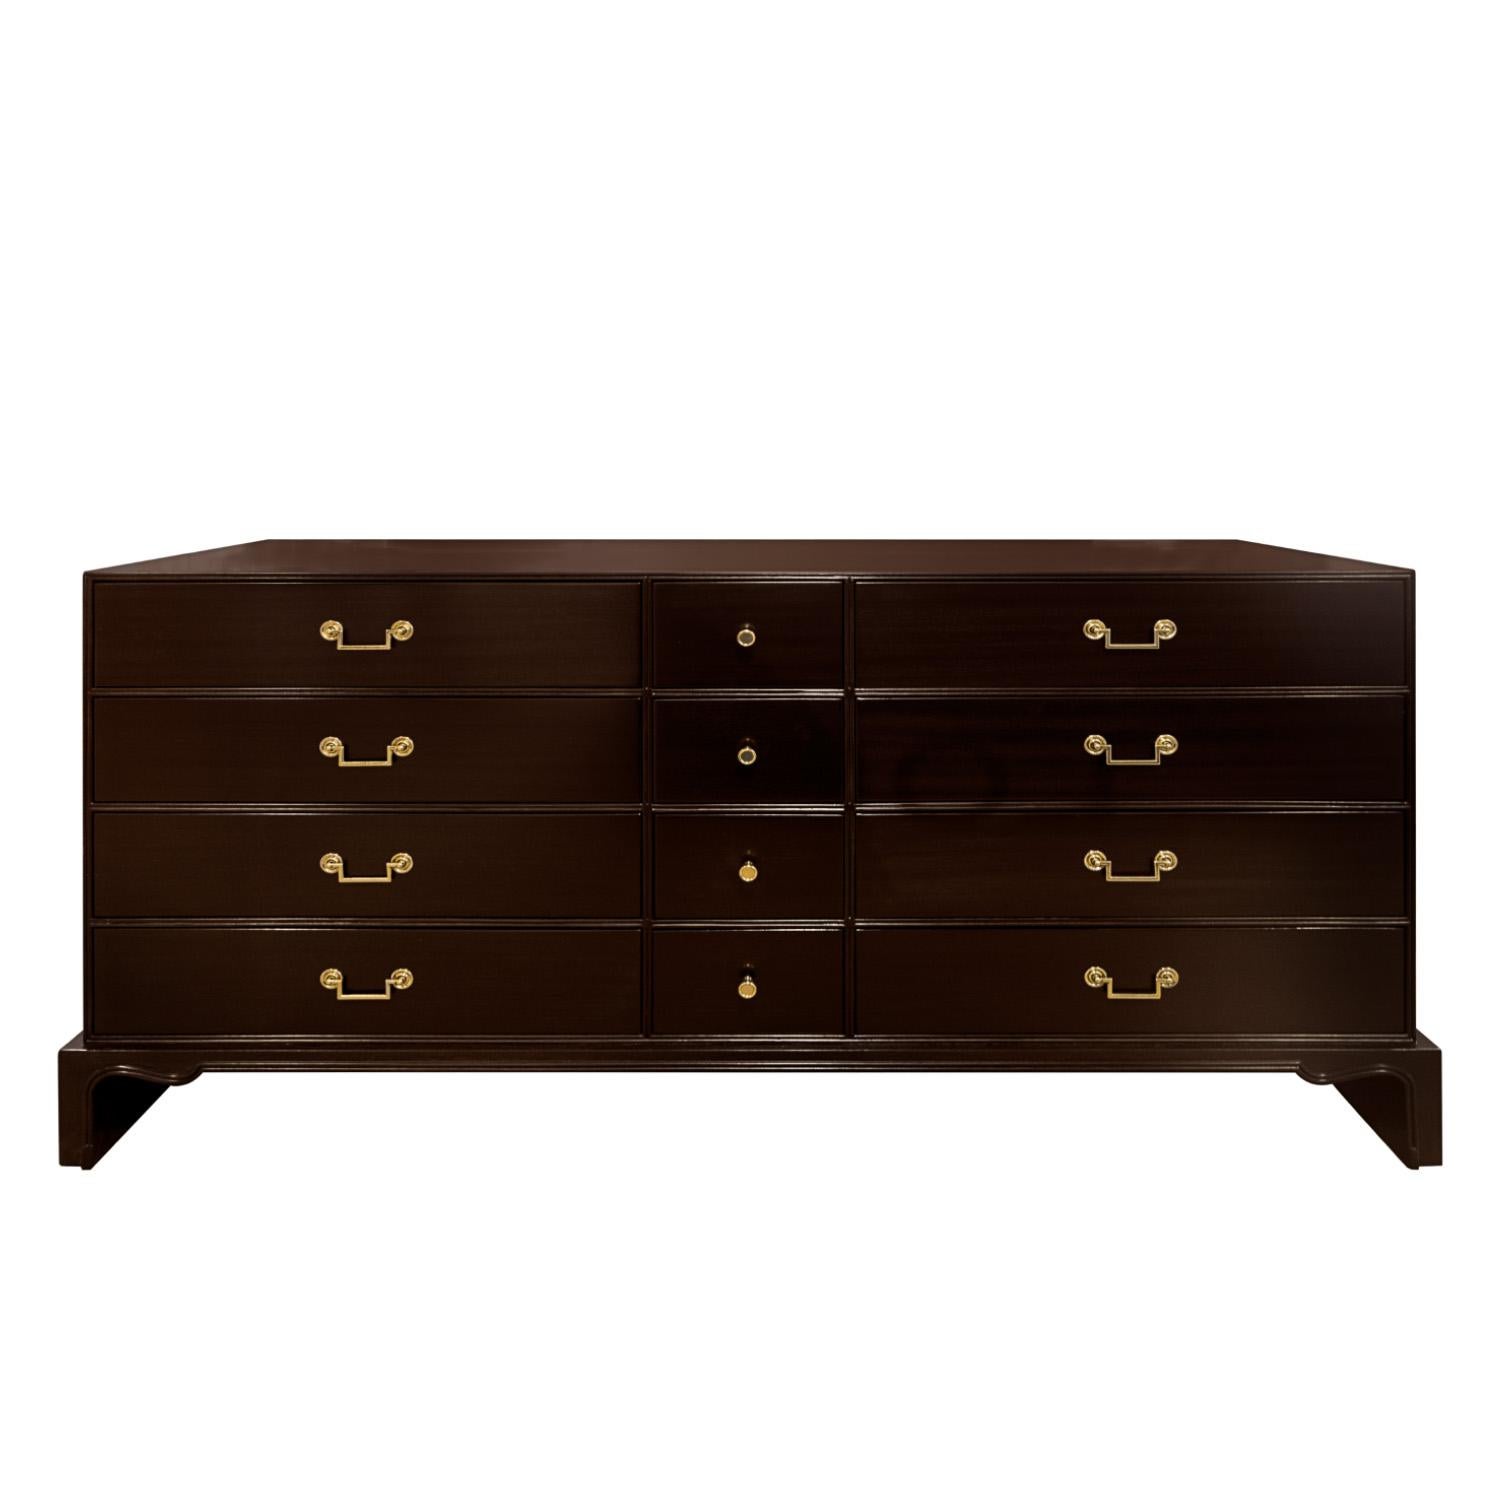 Chest of drawers model TP104 in dark brown mahogany with brass pulls by Tommi Parzinger for Charak Modern, American 1940's (signed 